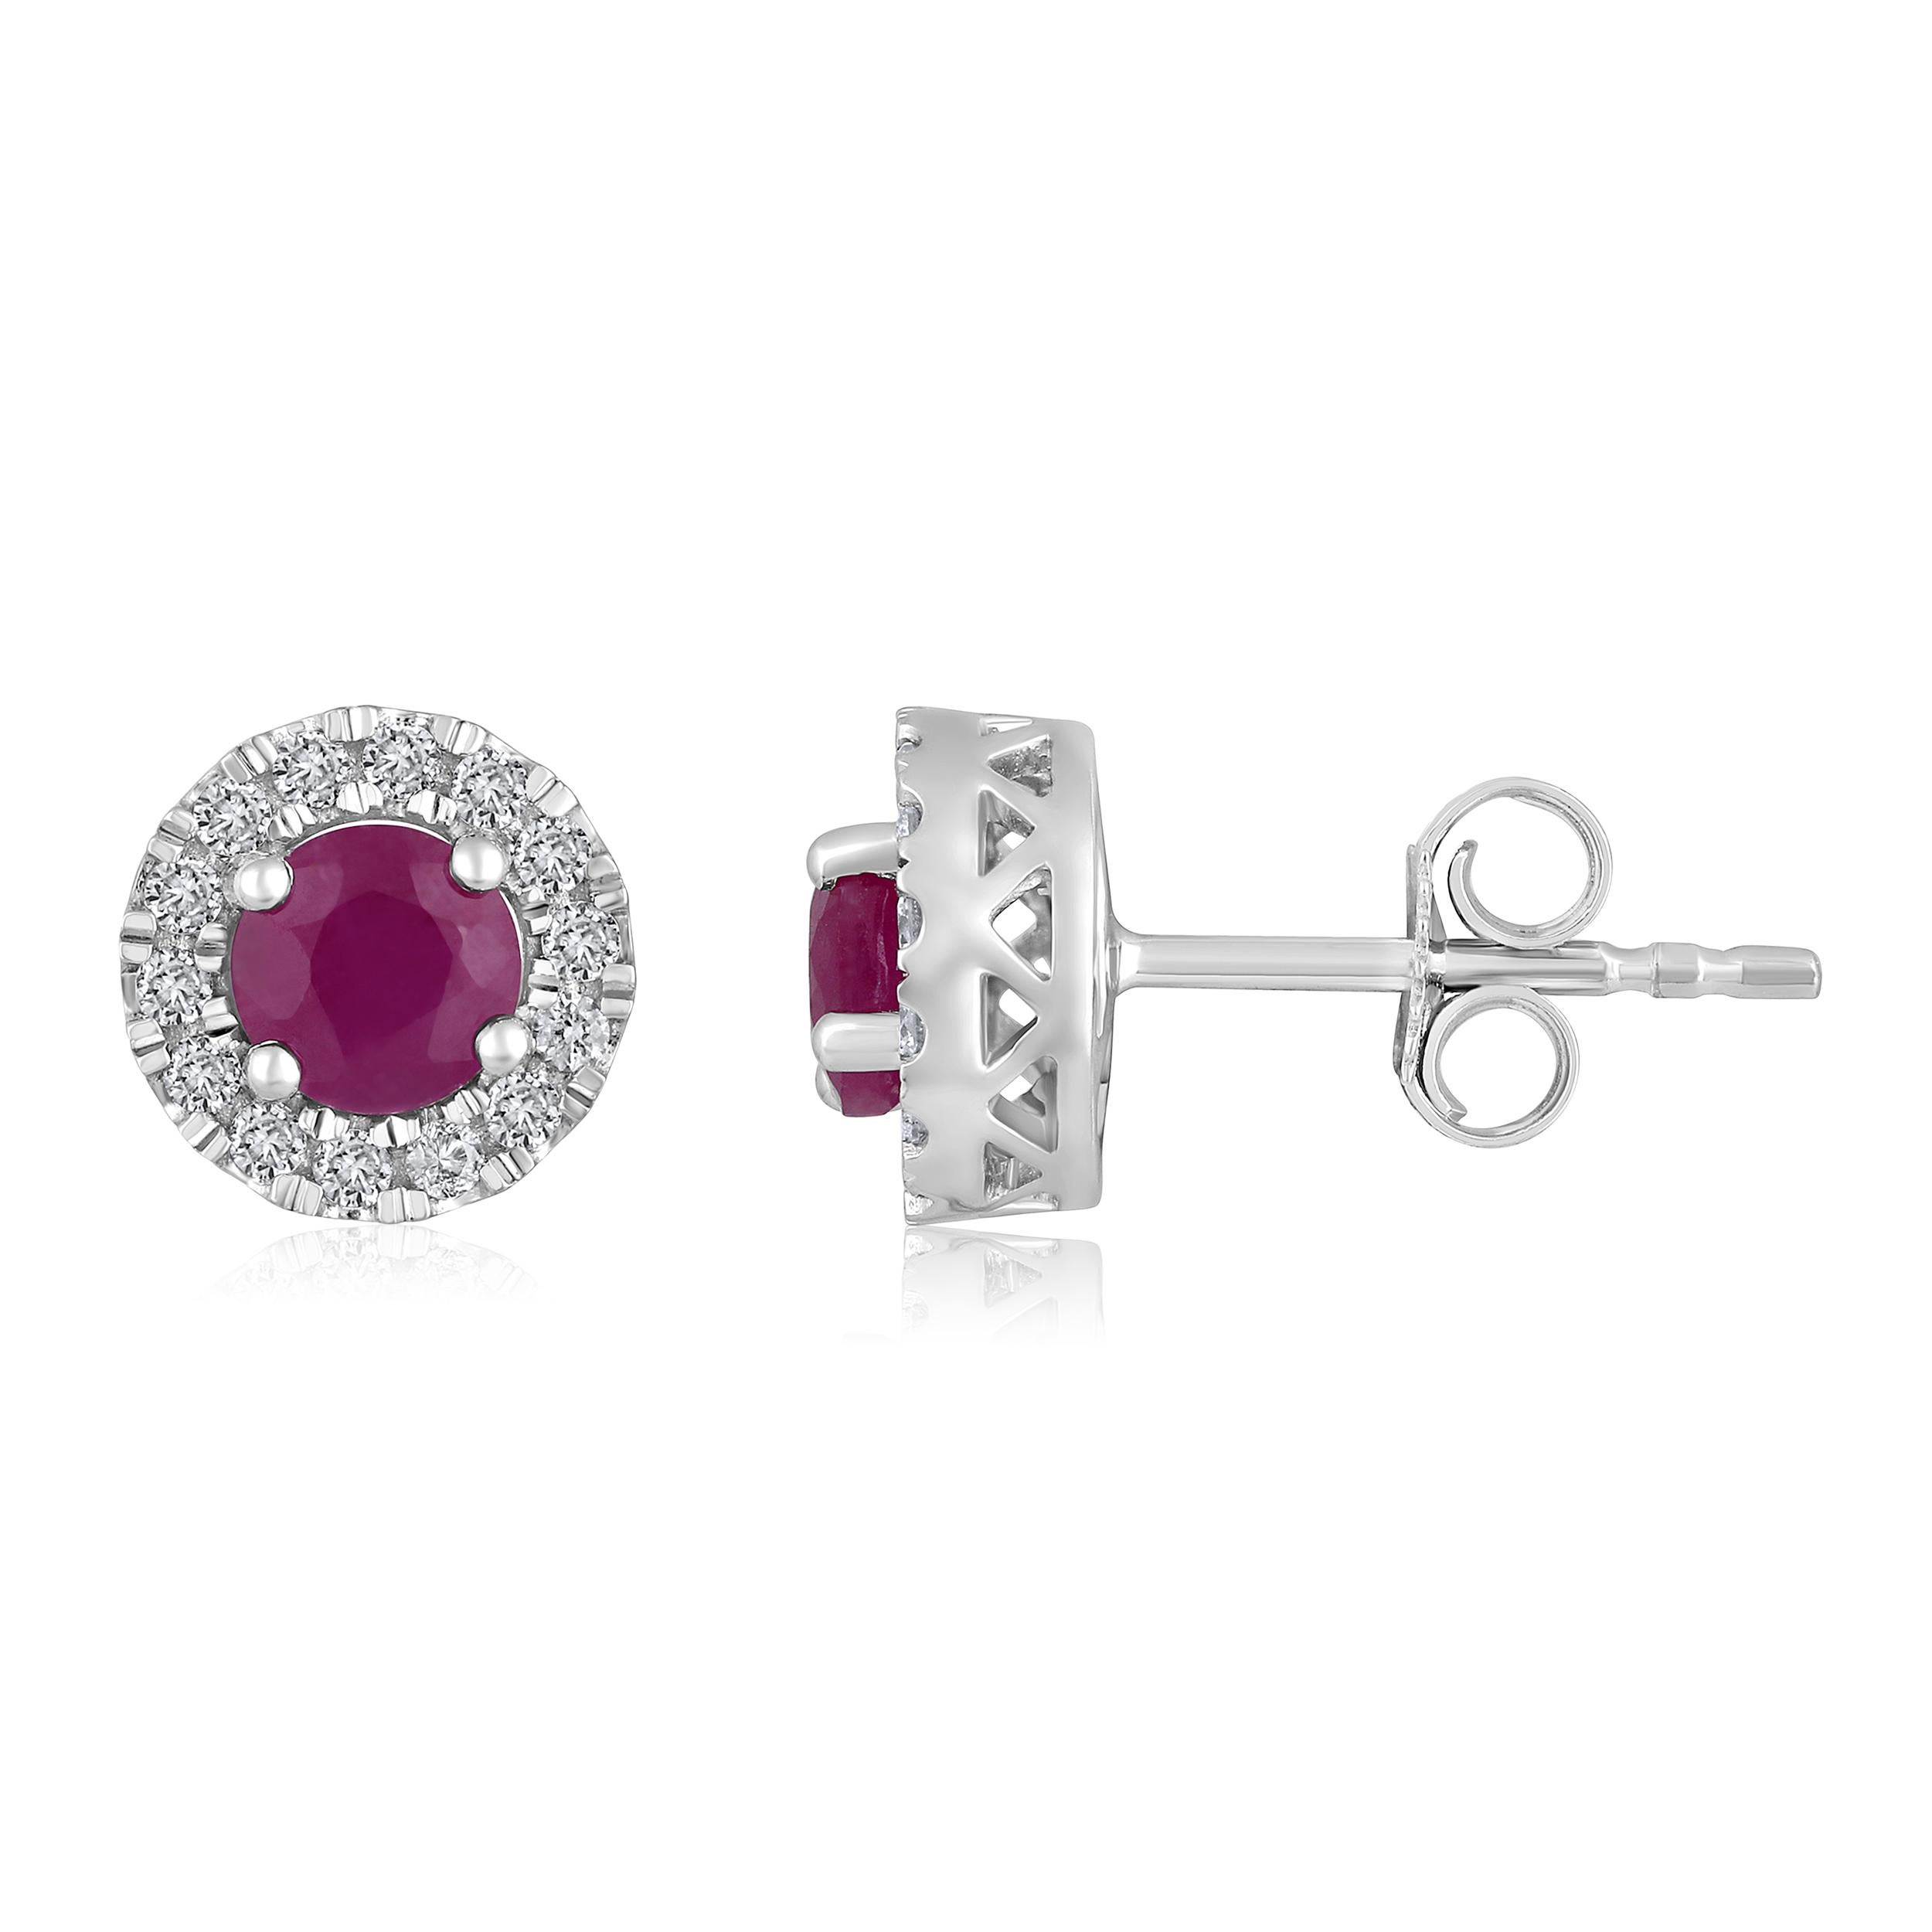 Crafted in 2.25 grams of 14K White Gold, the earrings contain 28 stones of Round Natural Diamonds with a total of 0.23 carat in F-G color and I1-I2 clarity combined with 2 stones of Round Shaped Natural Ruby Gemstones with a total of 0.91